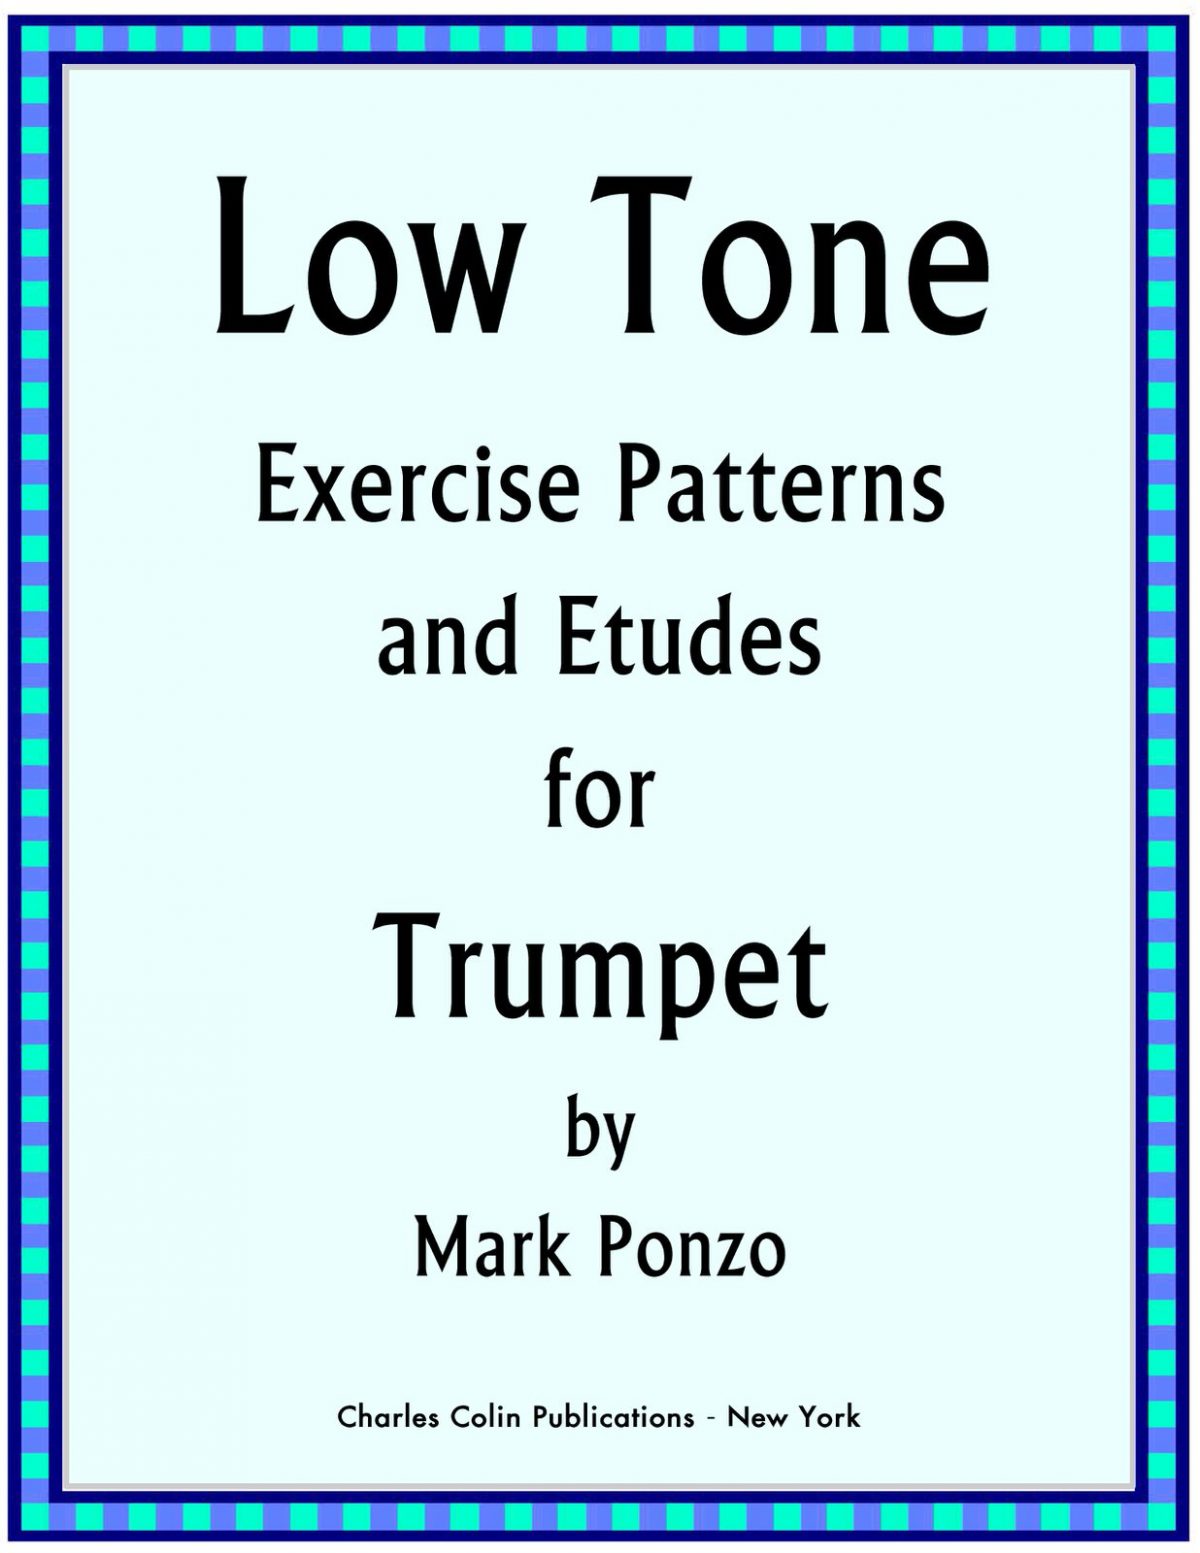 Ponzo, Low Tone Exercise Patterns and Etudes for Trumpet_000001